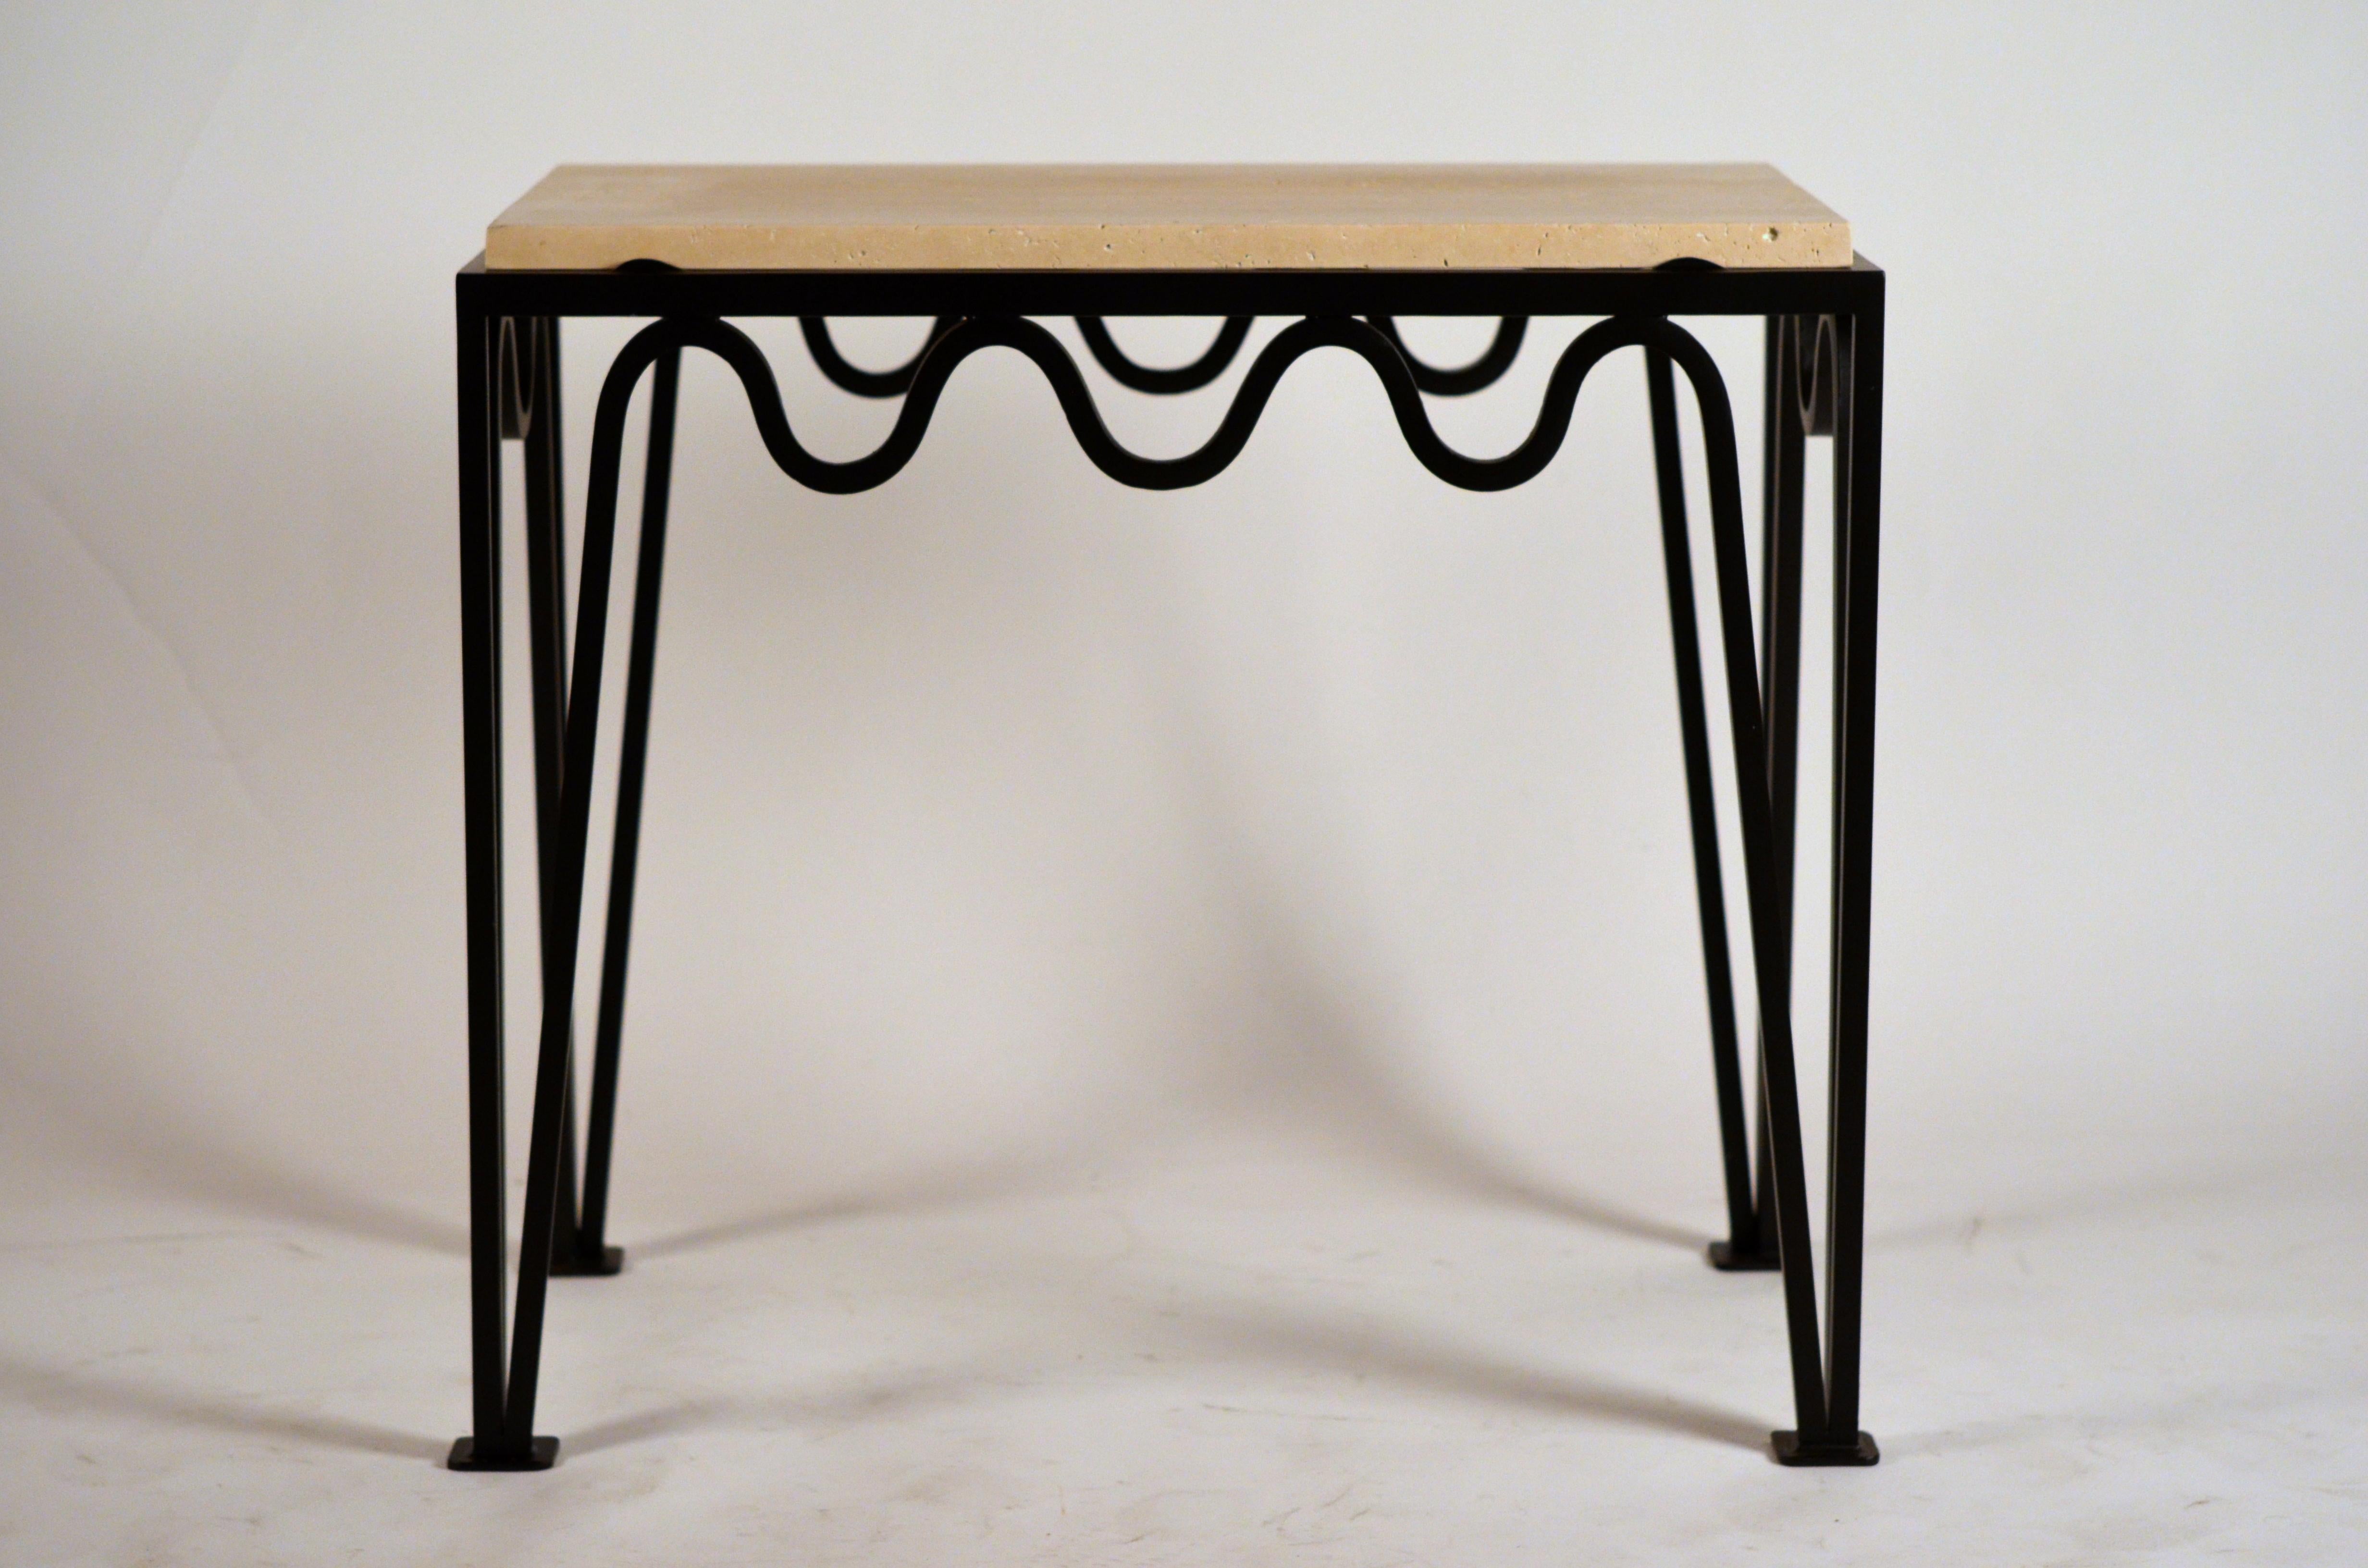 Steel Pair of Chic 'Méandre' Black Iron and Travertine Side Tables by Design Frères For Sale